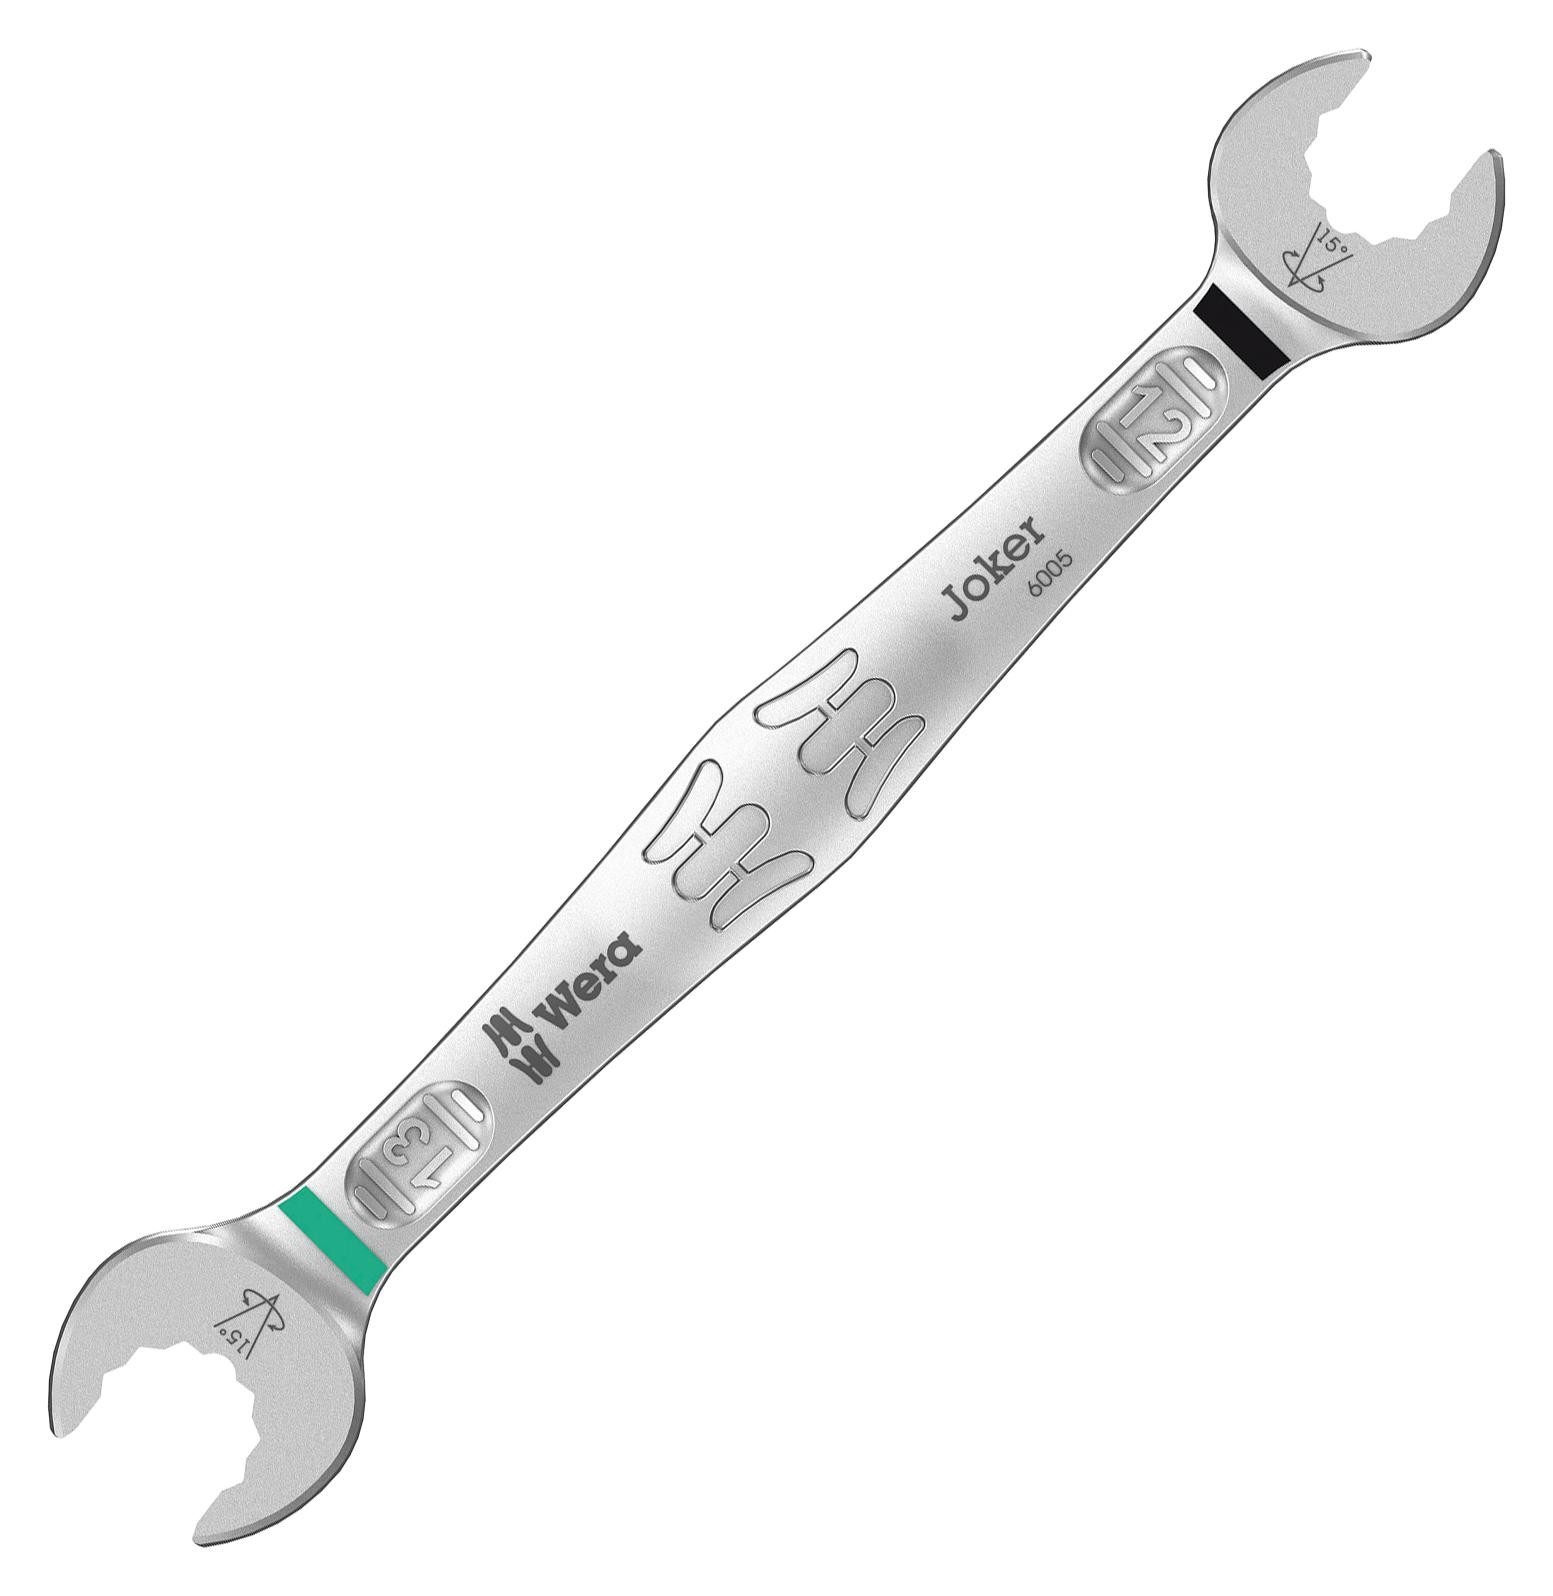 Wera 05020313001 Double Open-End Wrench, 13mm, 166mm